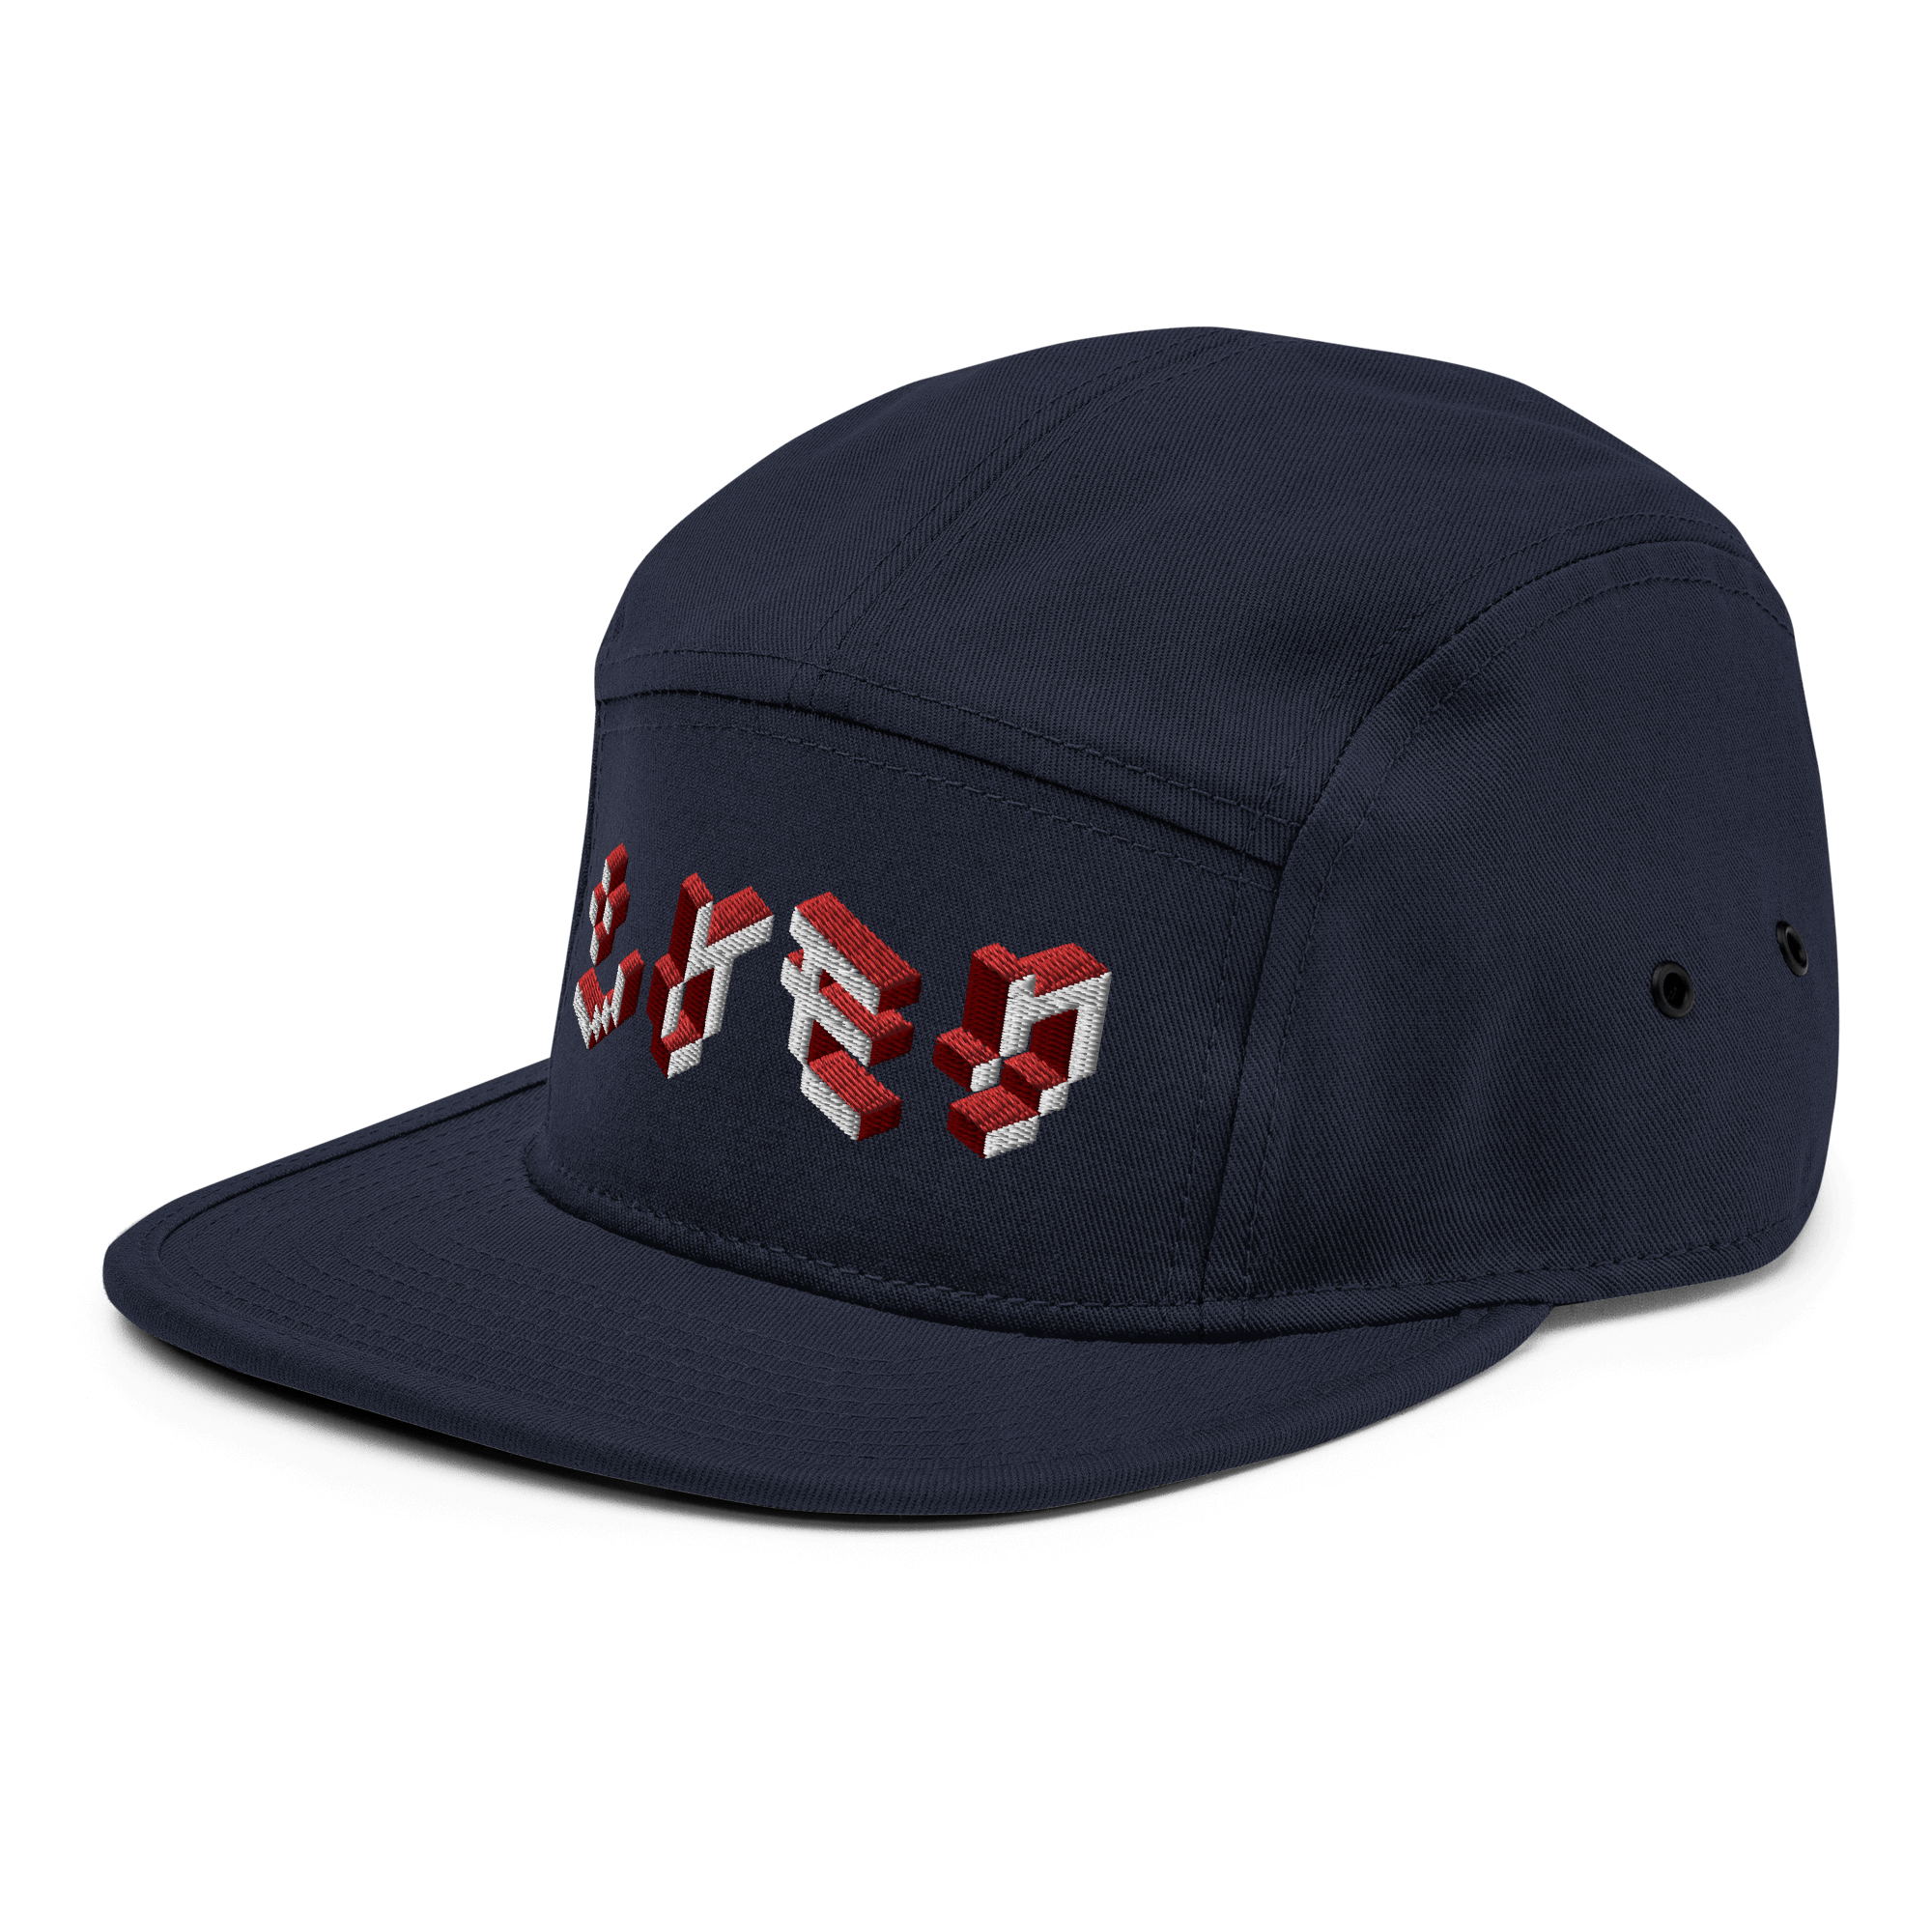 Shikemoku Camper CapUnleash nostalgia with our 8-bit 'Shikemoku' design in Katakana Japanese, capturing the essence of 'Cigarette Butt.' This structured camper cap boasts a firm front panel, tailored just for you upon ordering. While it takes a bit longer